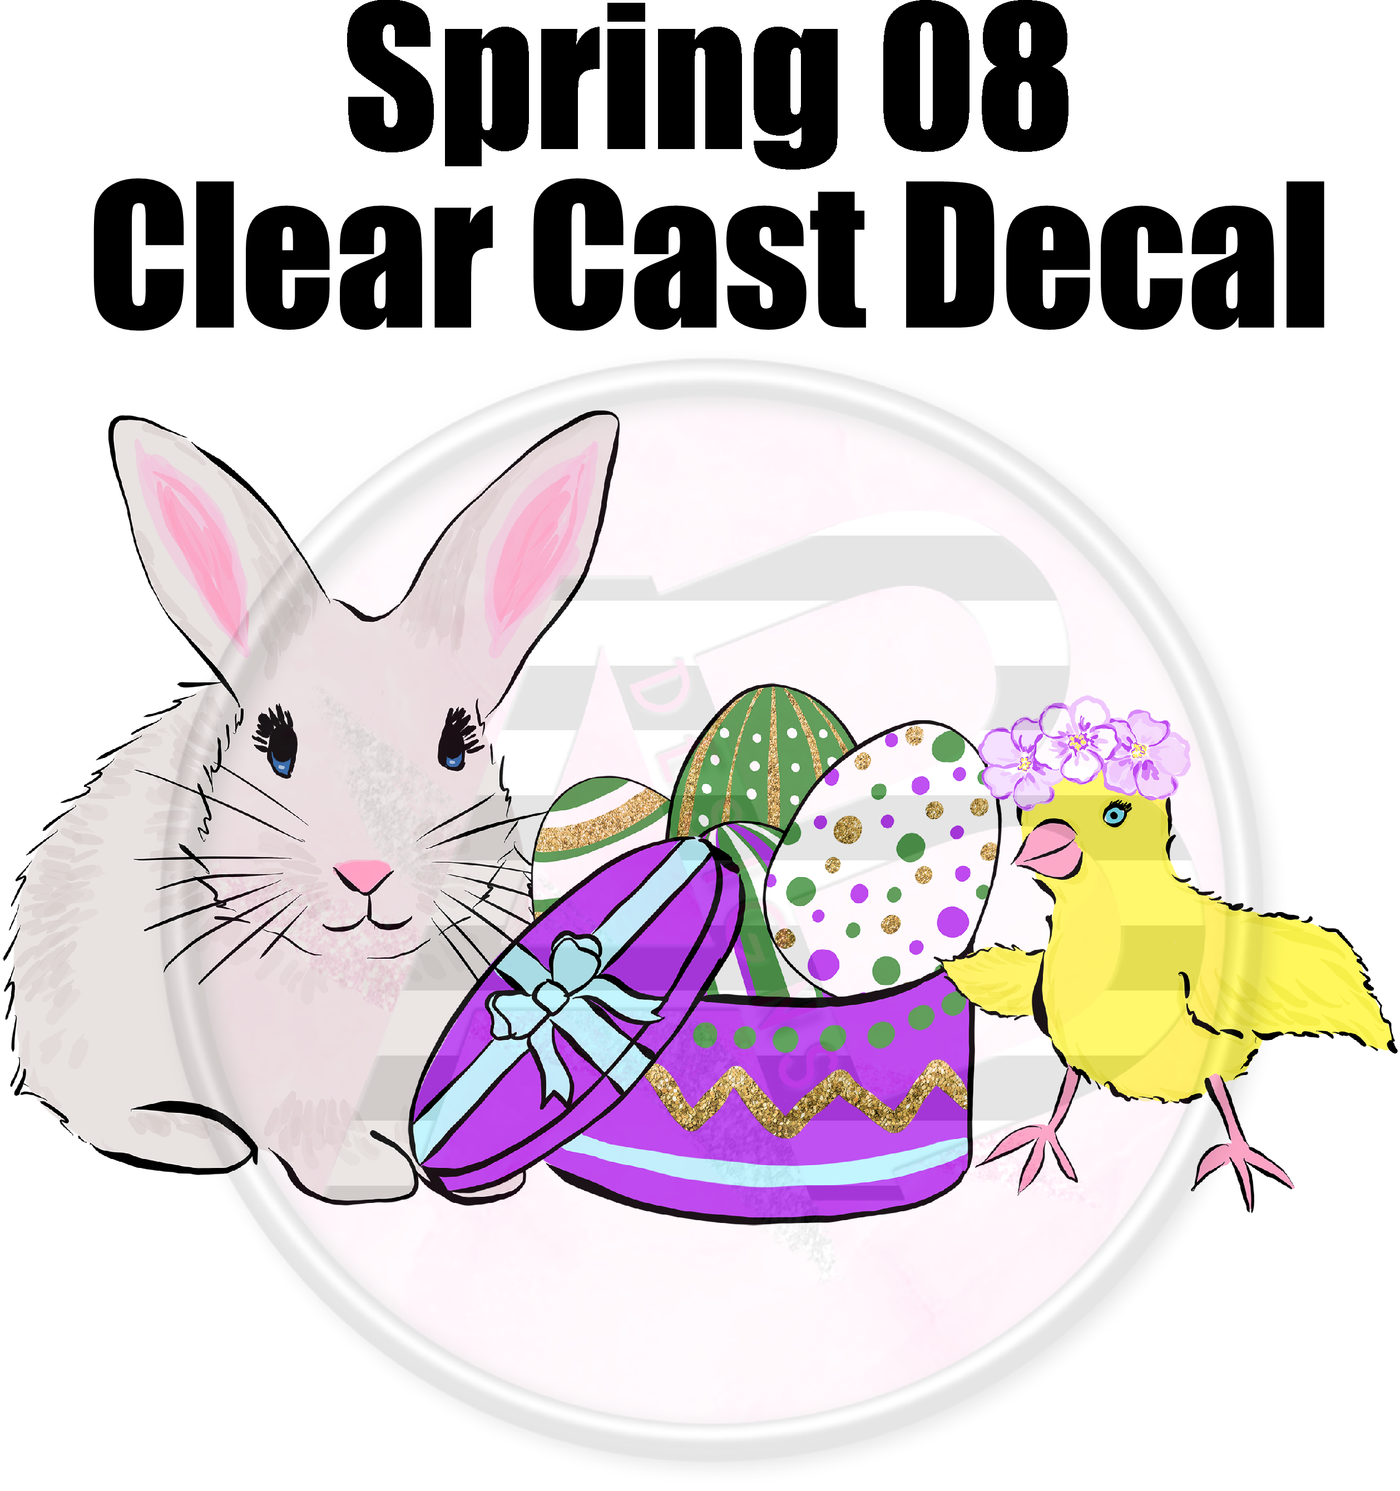 Spring 08 - Clear Cast Decal